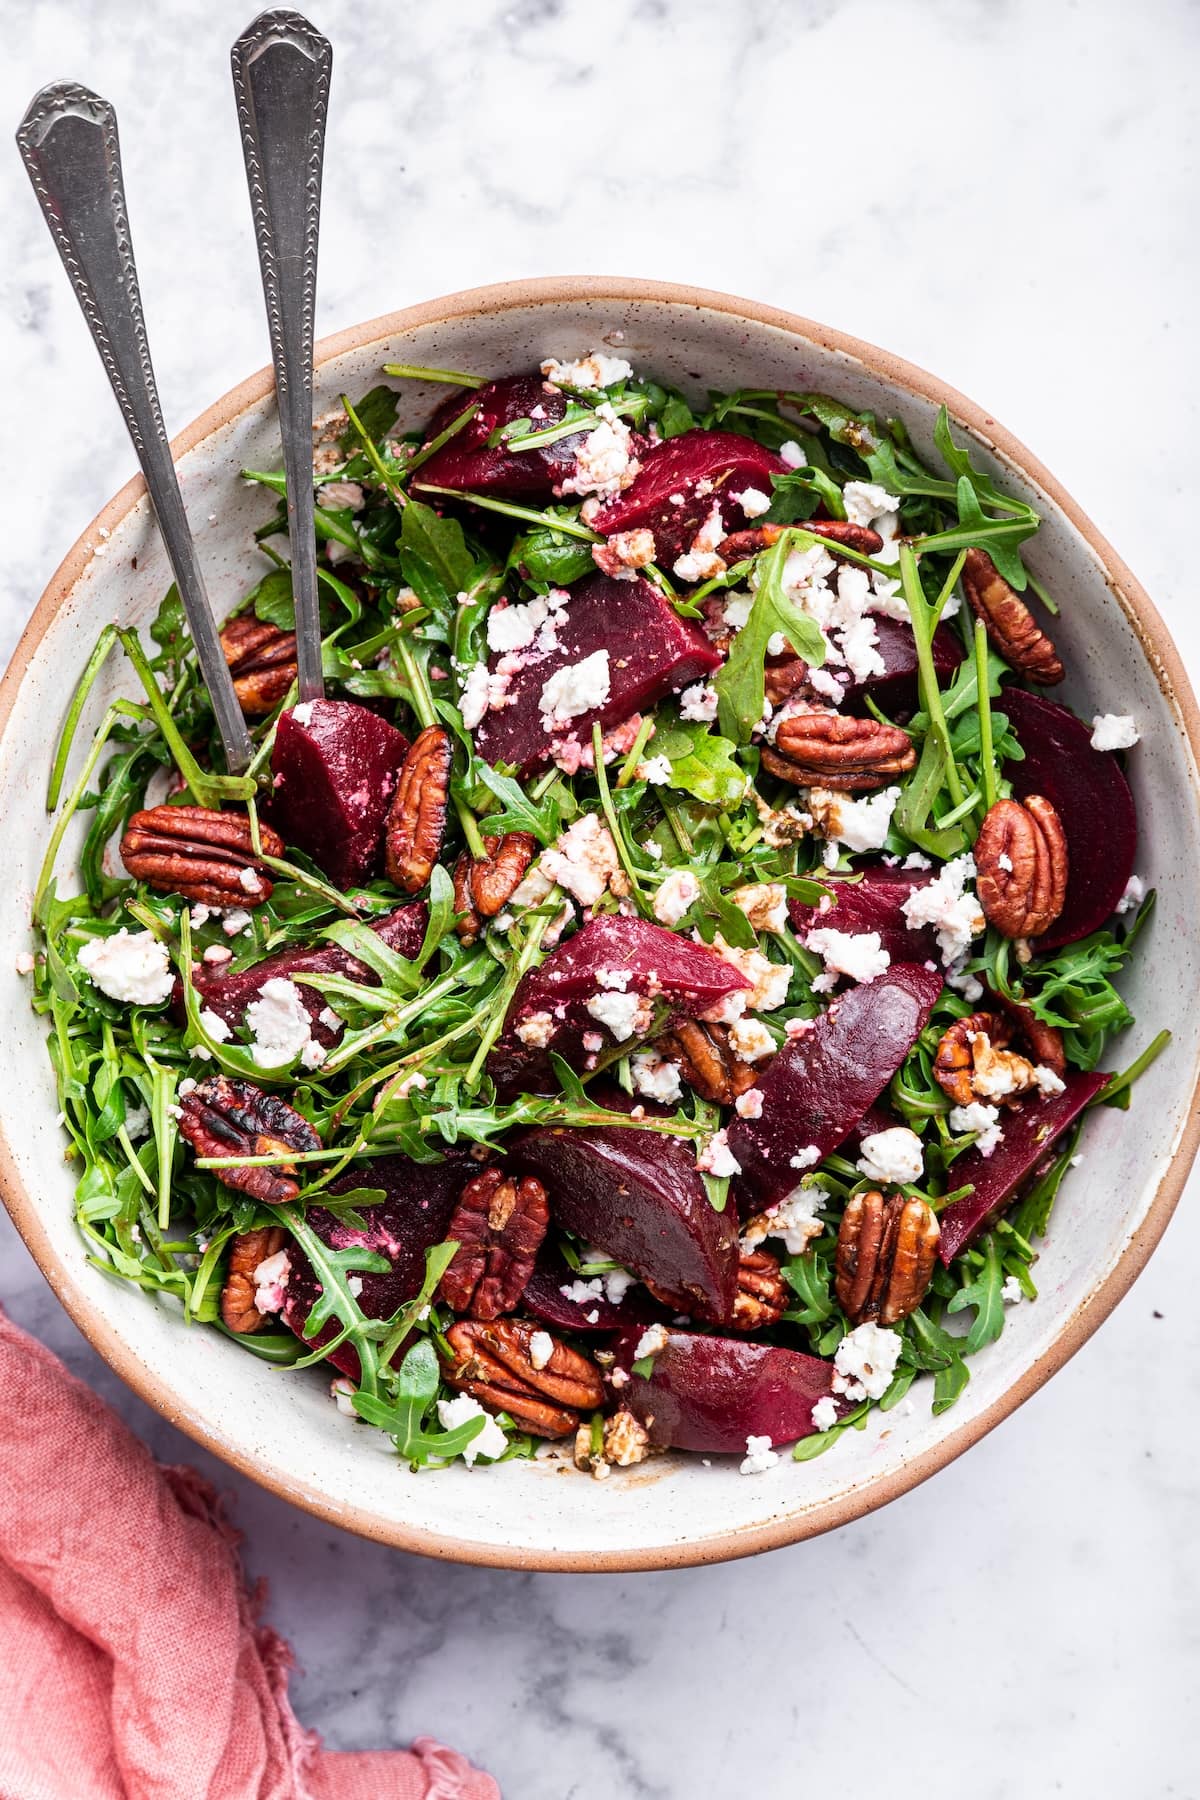 A beet salad with arugula, pecans, and crumbled feta in a bowl with two metal serving spoons.